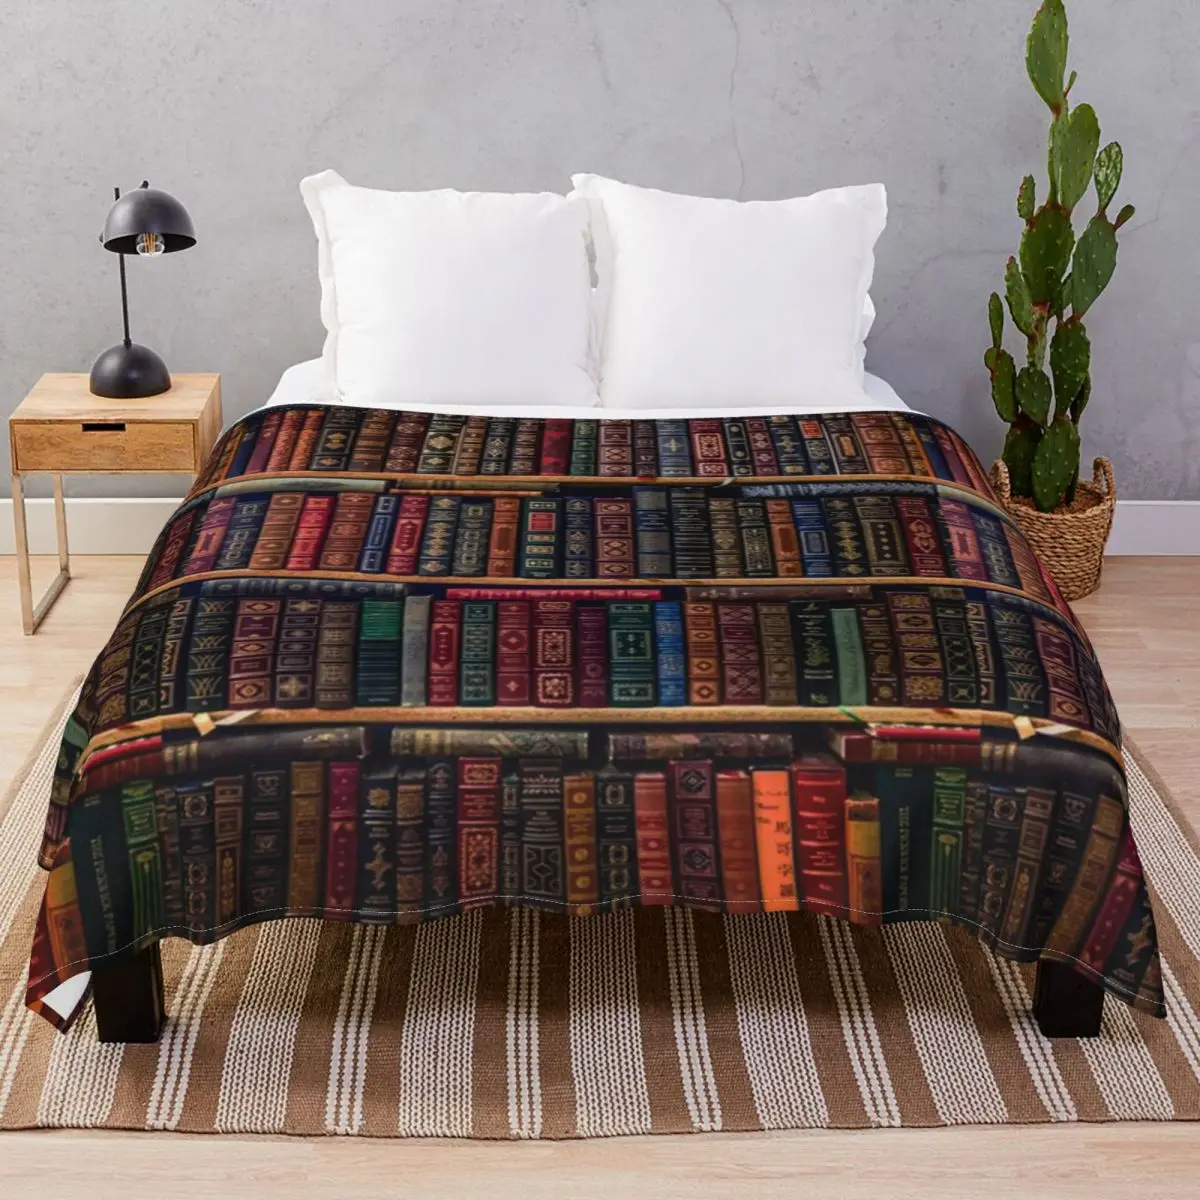 Books Blankets Fleece Autumn Lightweight Thin Throw Blanket for Bed Home Couch Travel Office